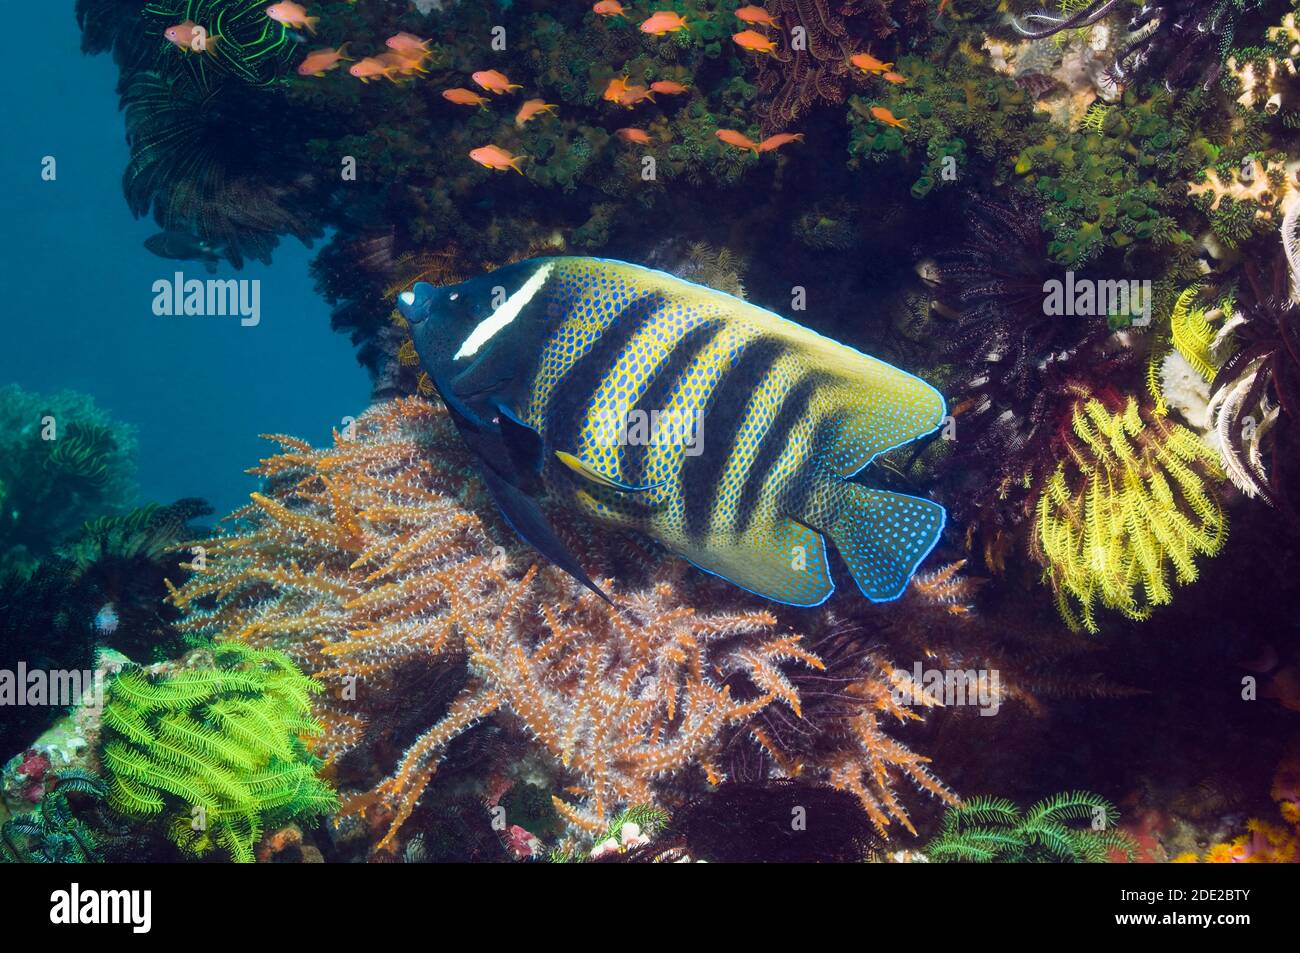 Six-banded angelfish (Pomacanthus sexstriatus) being cleaned by a Bluestreak cleaner wrasse (Labroides dimidiatus) Stock Photo